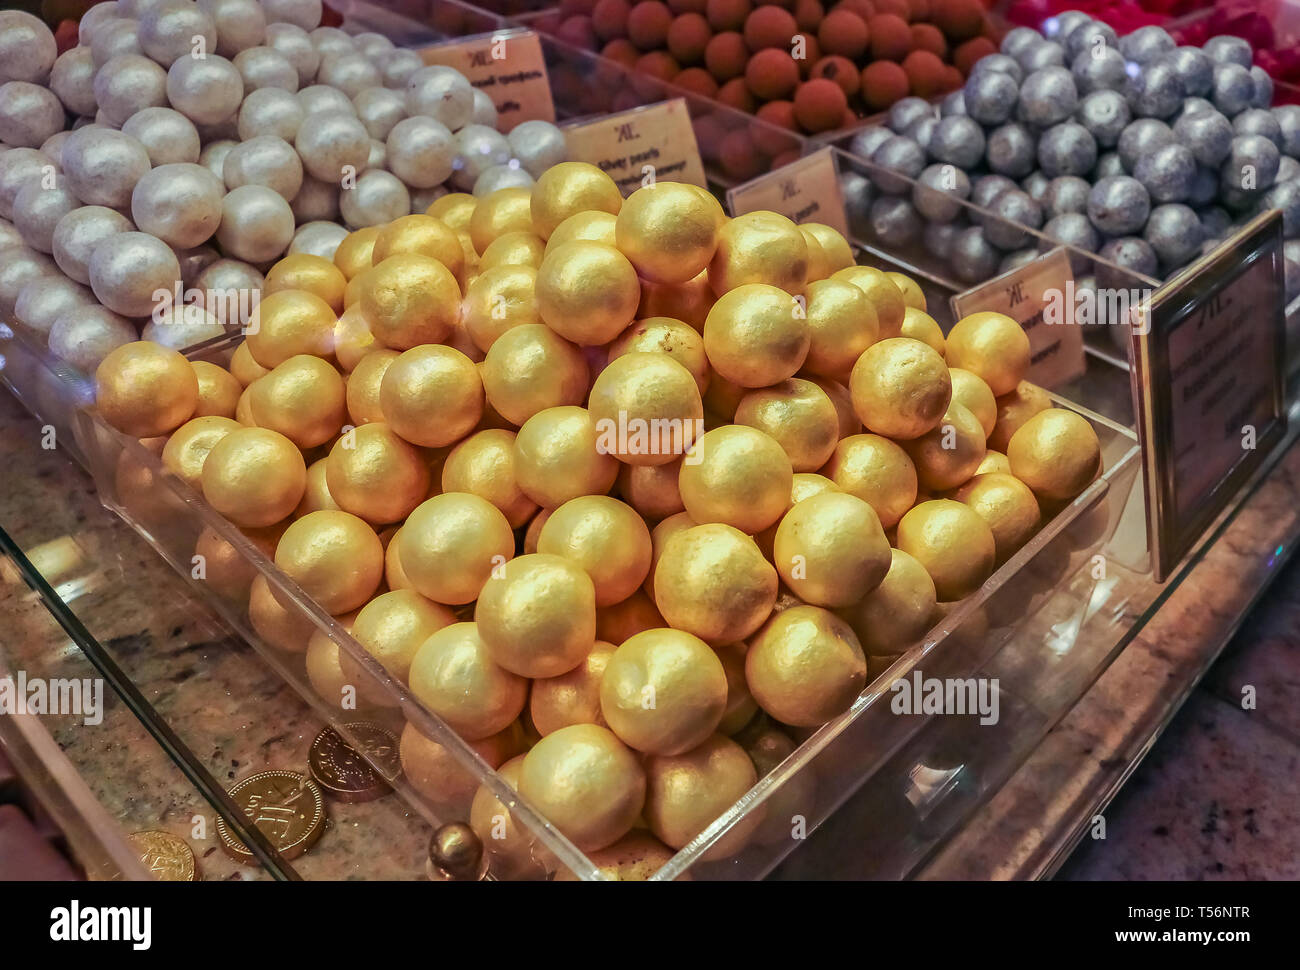 Saint Petersburg, Russia - October 05, 2015: Fancy gold and silver covered chocolate candy made in house on display at the famous grocery store Elisee Stock Photo